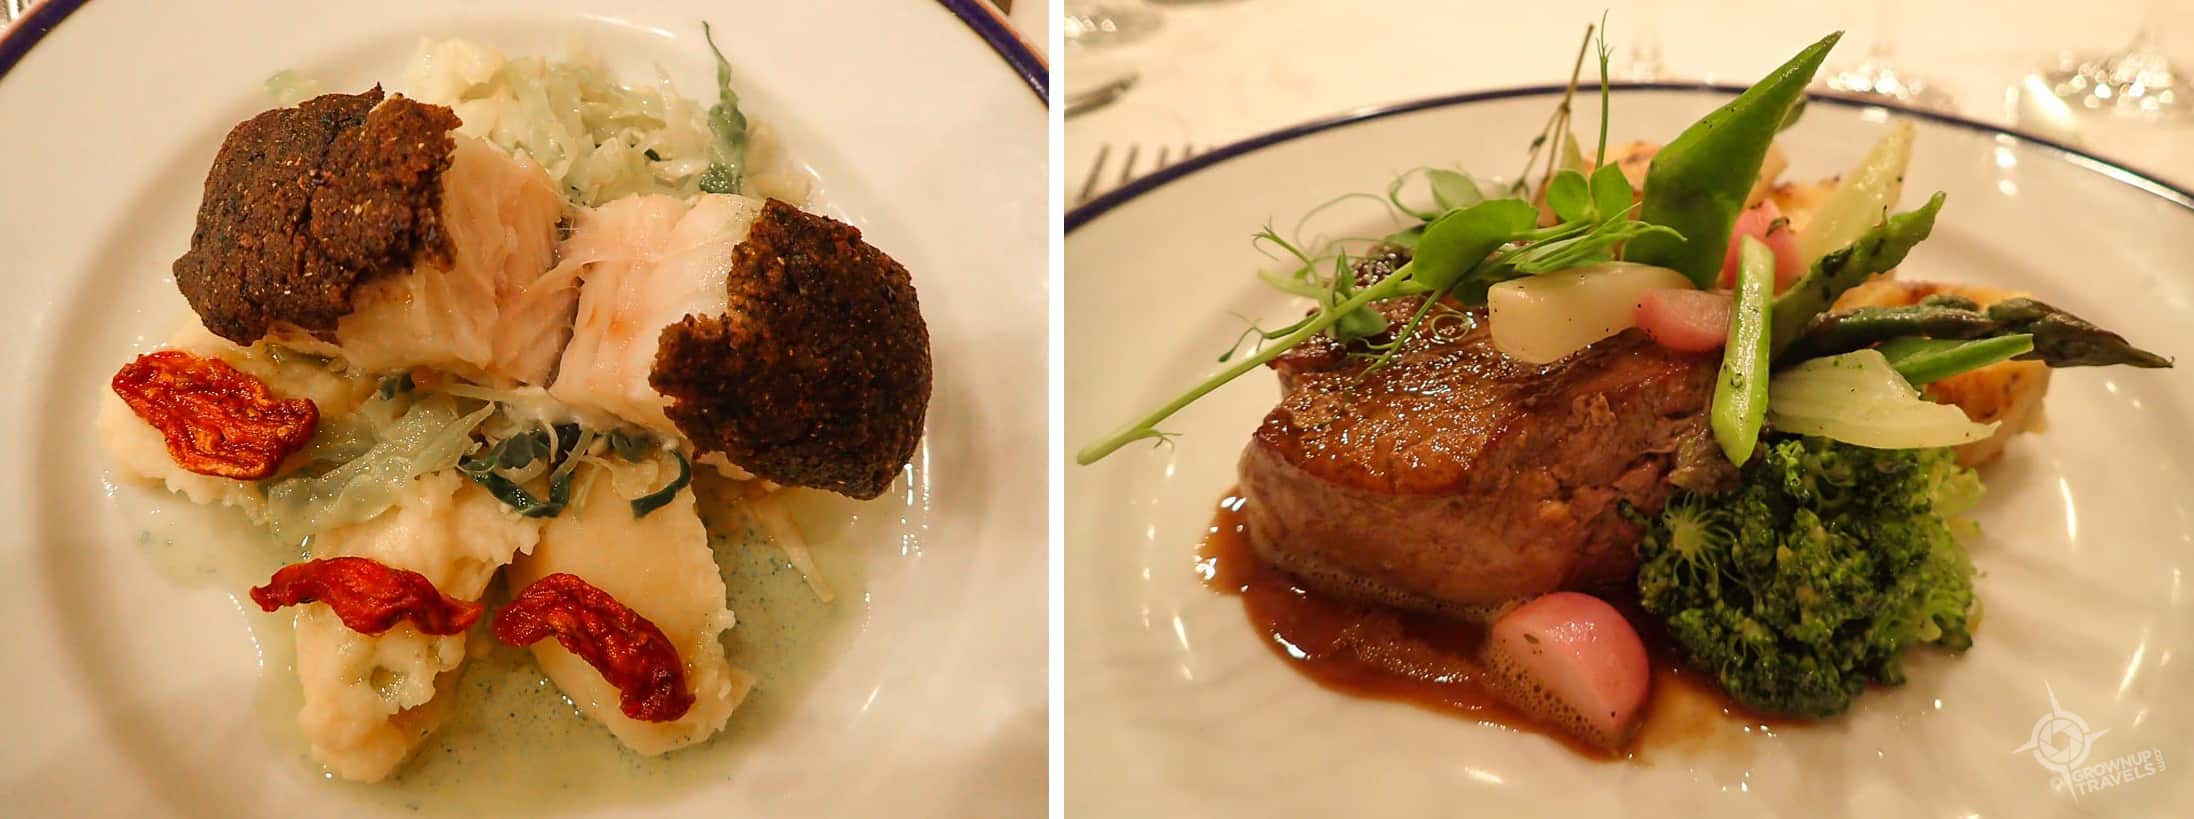 Cod and Beef Tournedos entrees at Bussaco Palace